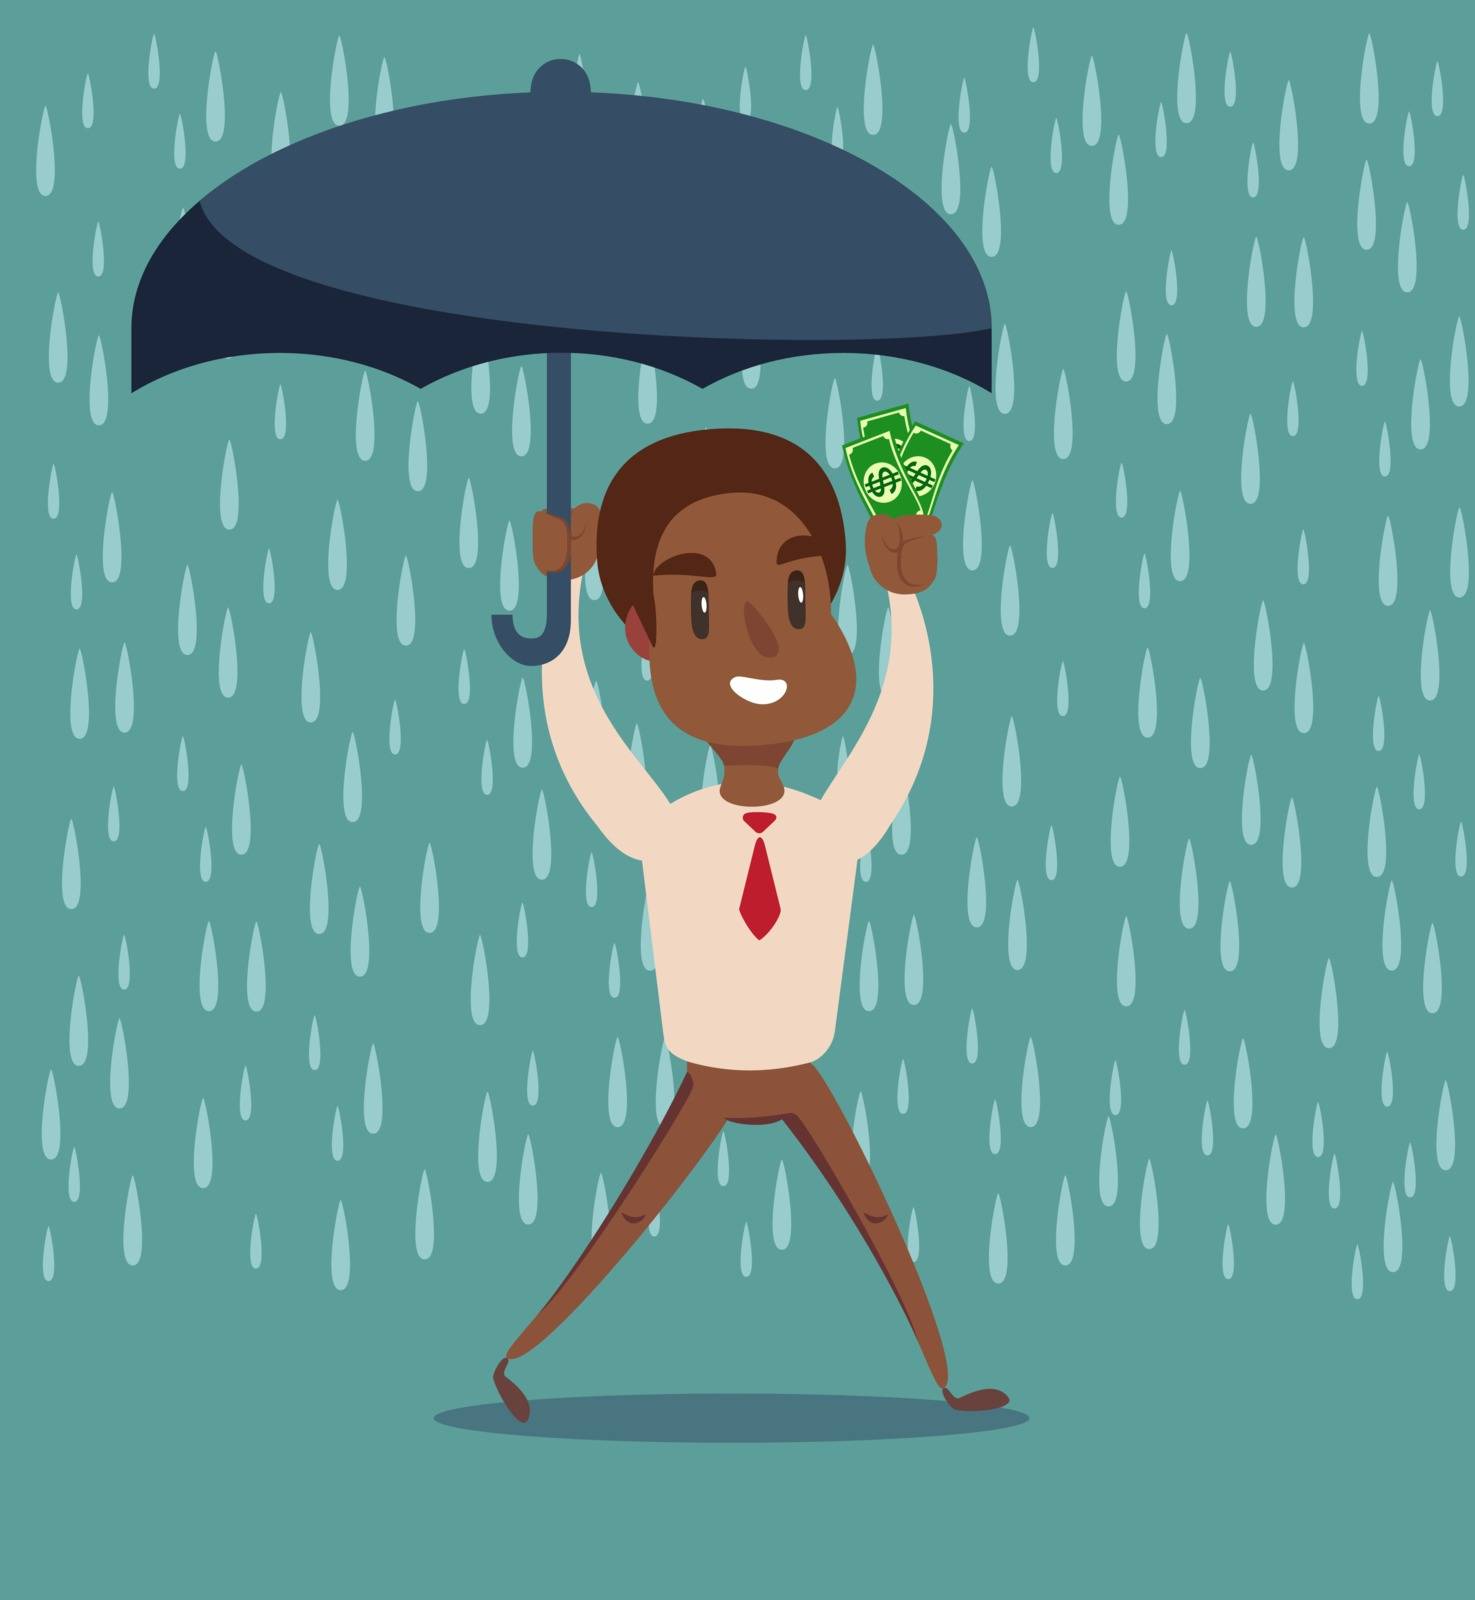 Businessman holding umbrella to protect money. Vector illustration for financial, insurance savings concept